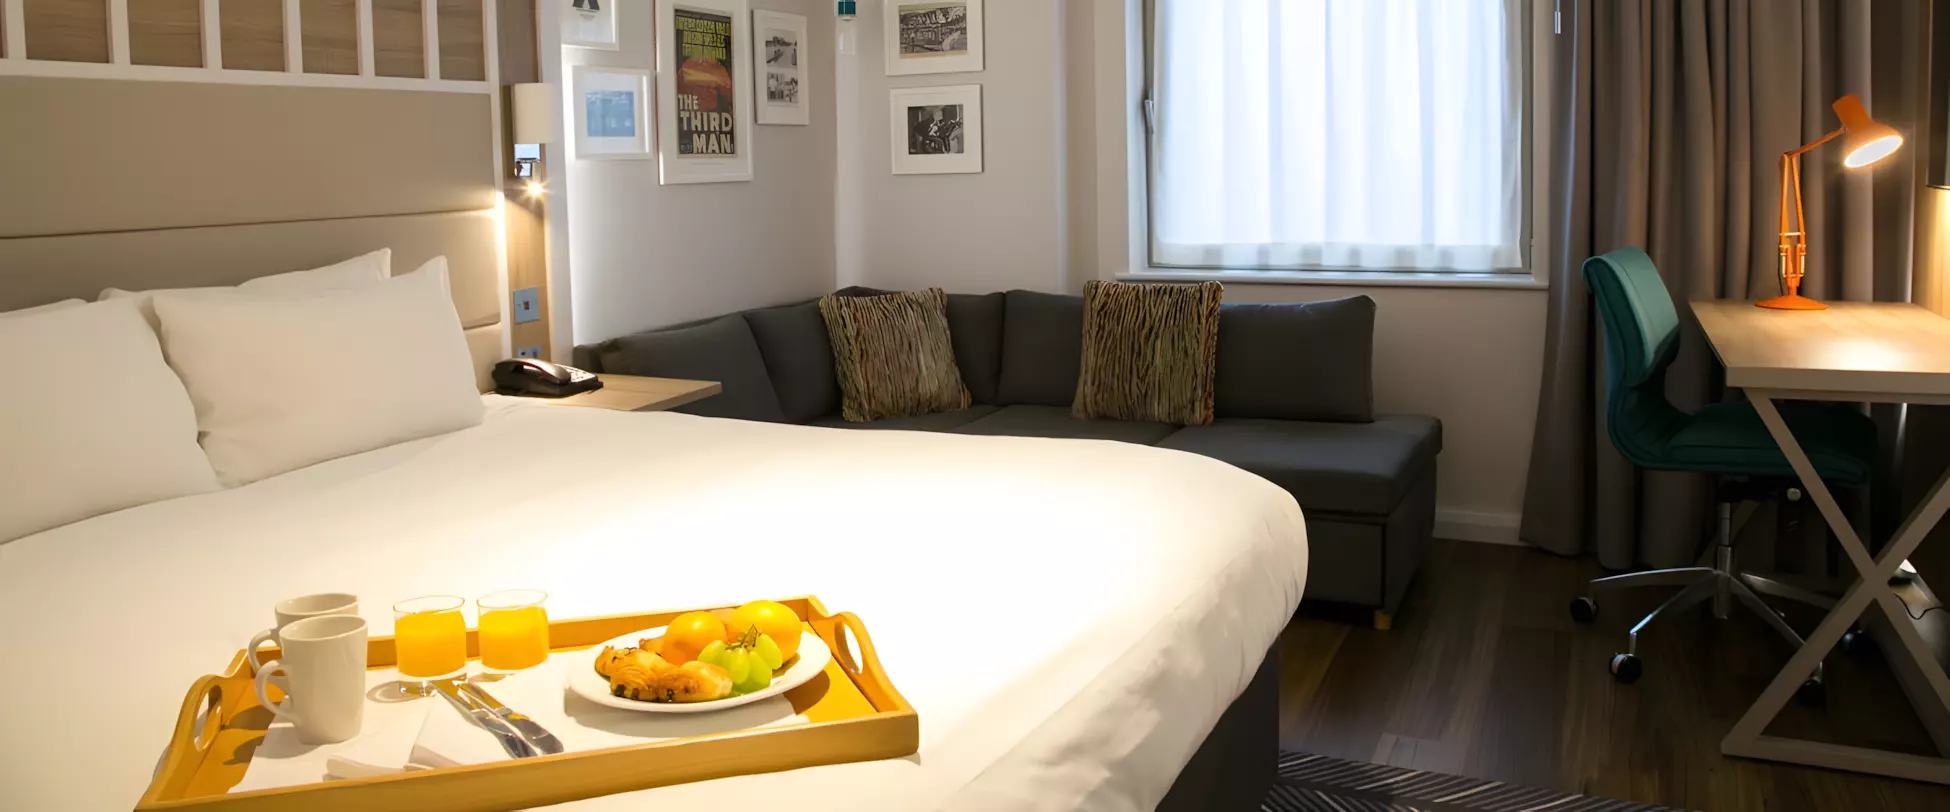 Stay in our newly refurbished rooms.